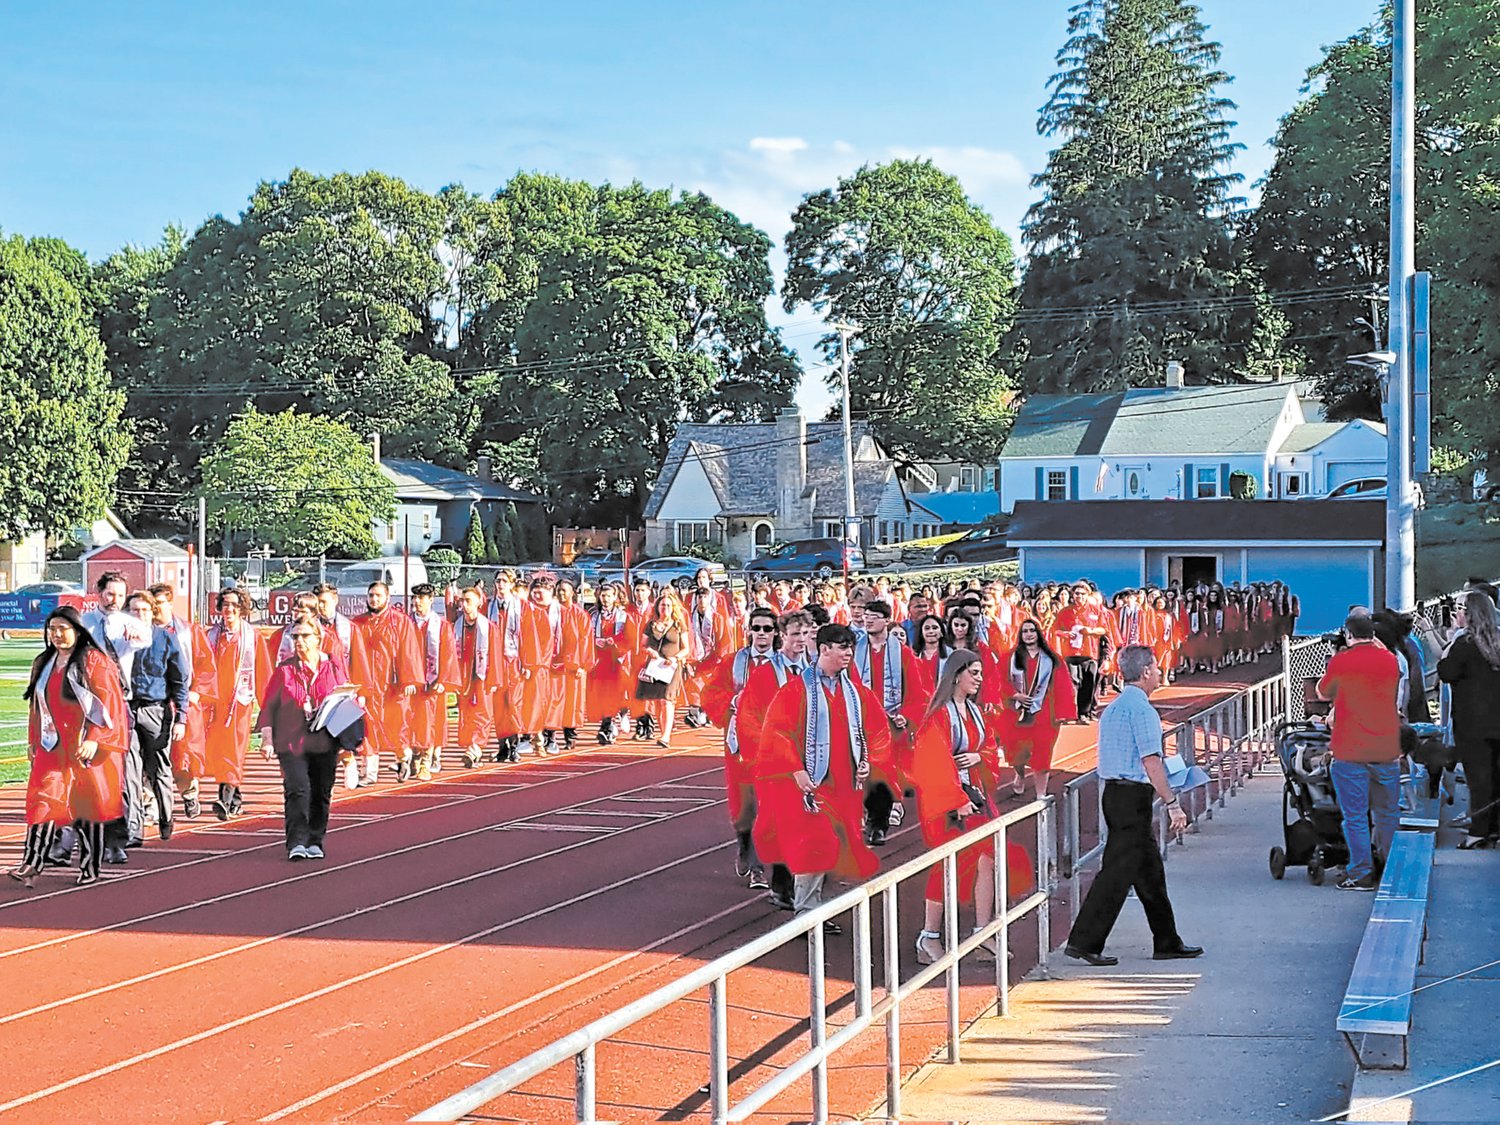 THE LONG-ANTICIPATED PROCESSION: The 228 graduating seniors, one of the largest CACTC groups to date, processed in as family, friends and the CHSW school community looked on. (Photo courtesy of Cranston Public Schools)